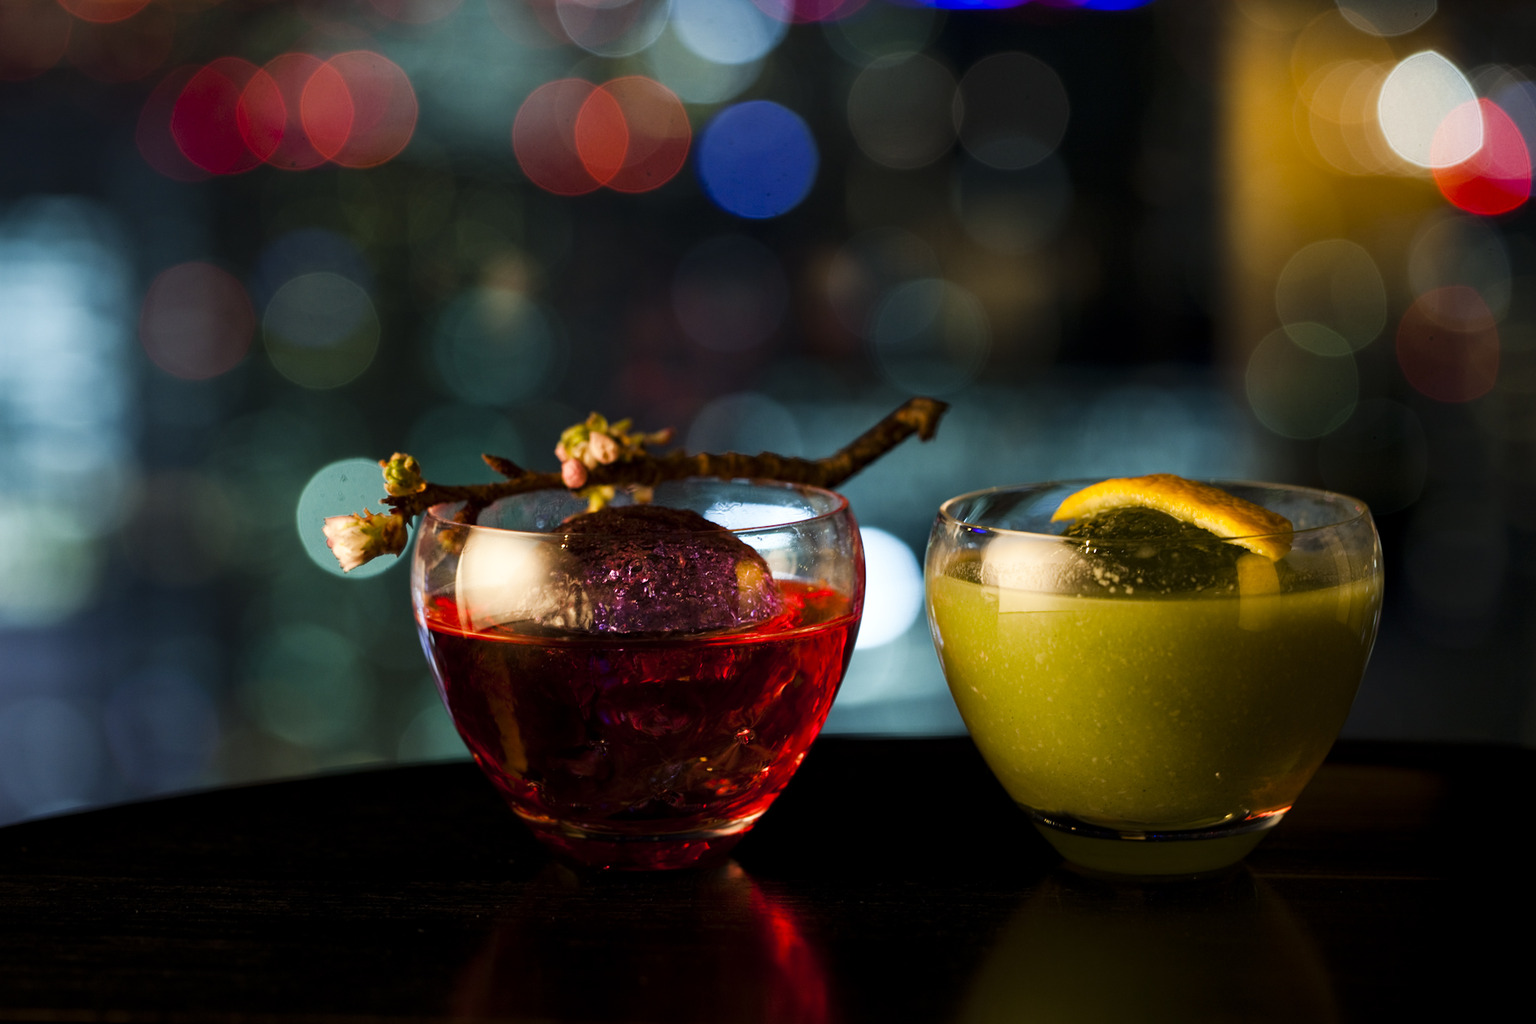 Andaz Tokyo Announces New Director of Food & Beverage, and 2016’s Summer Specials